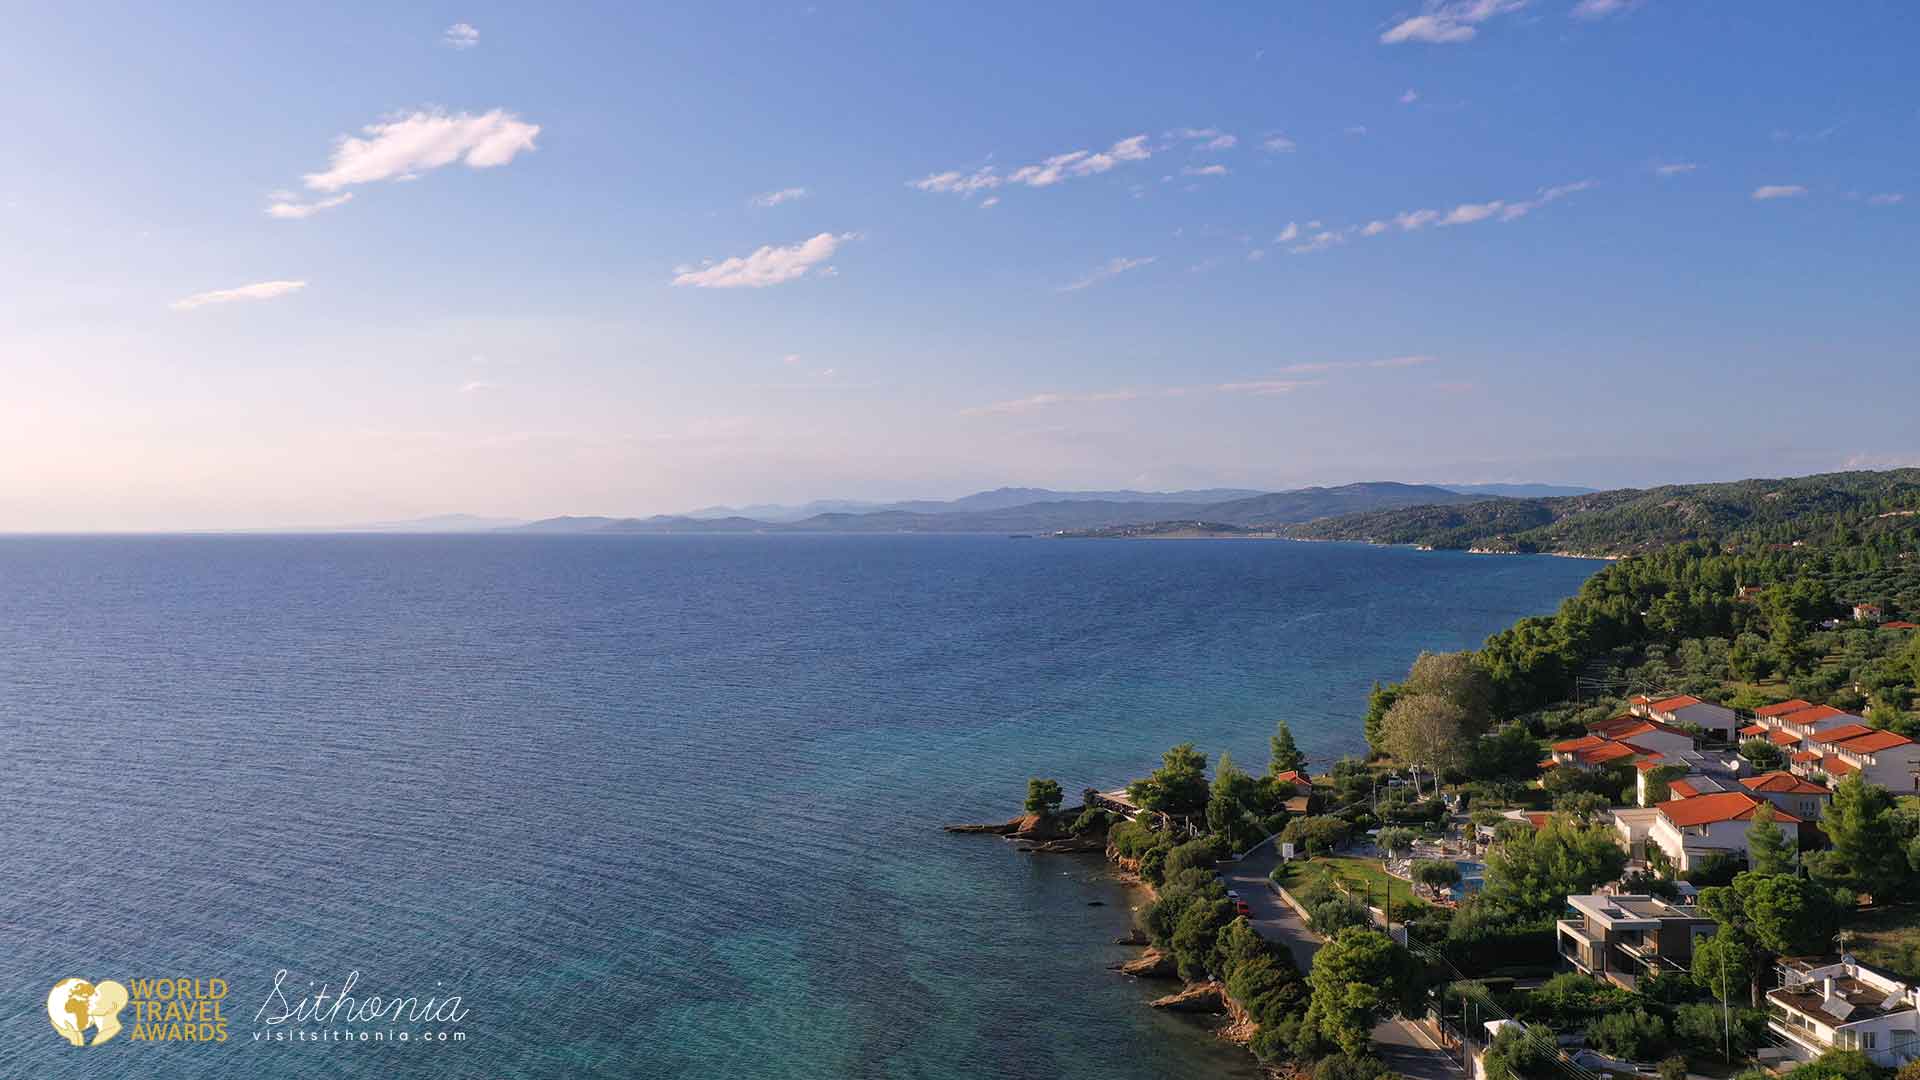 Halkidiki has been awarded the “Greece’s Leading Mainland Destination 2022”